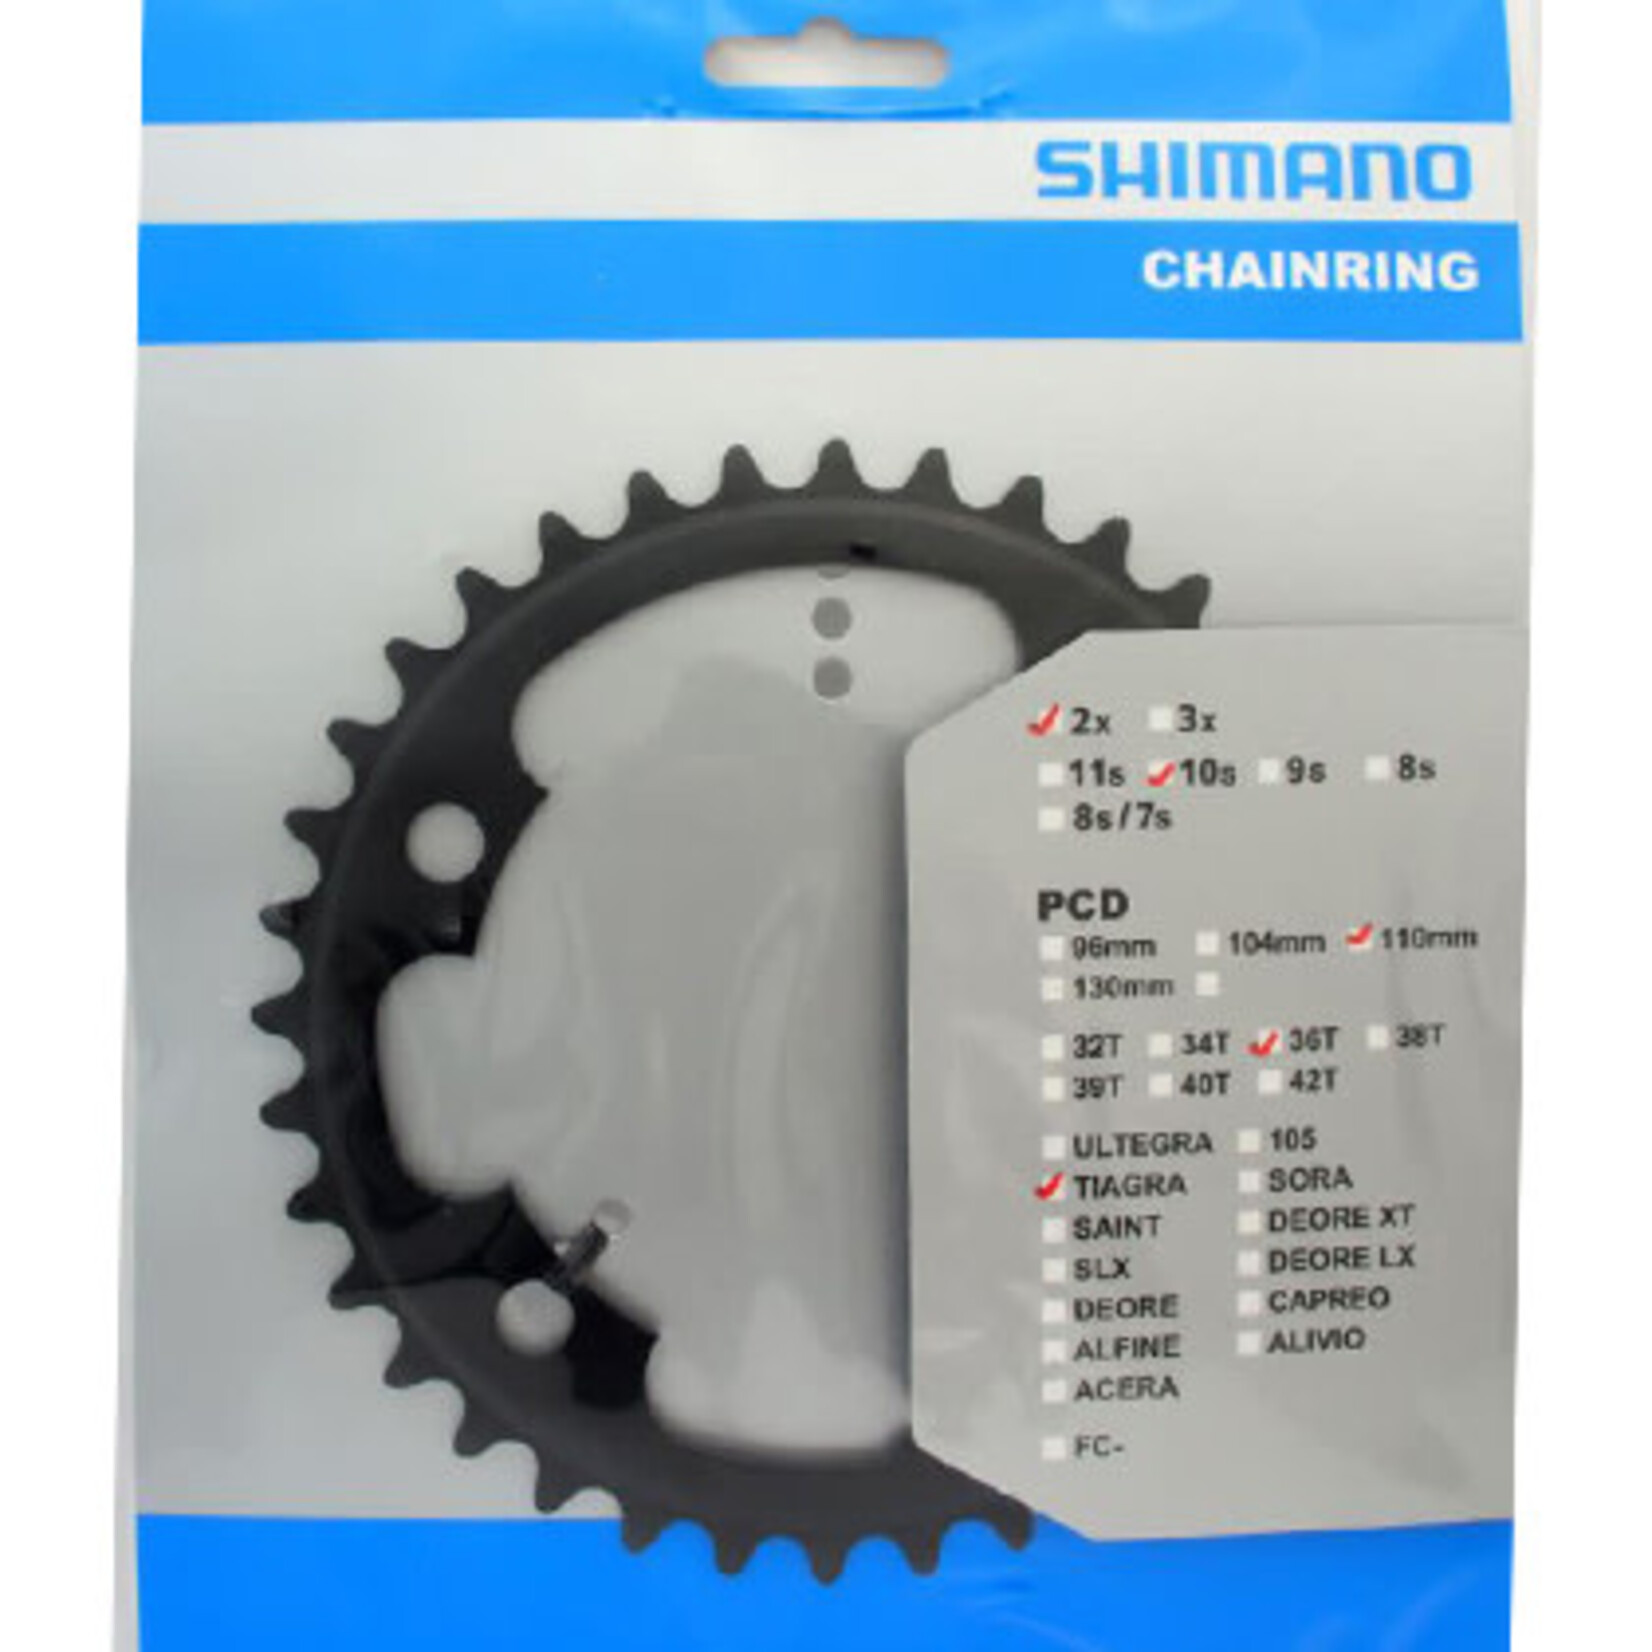 SHIMANO FC-4700 CHAINRING 36T for 52-36T